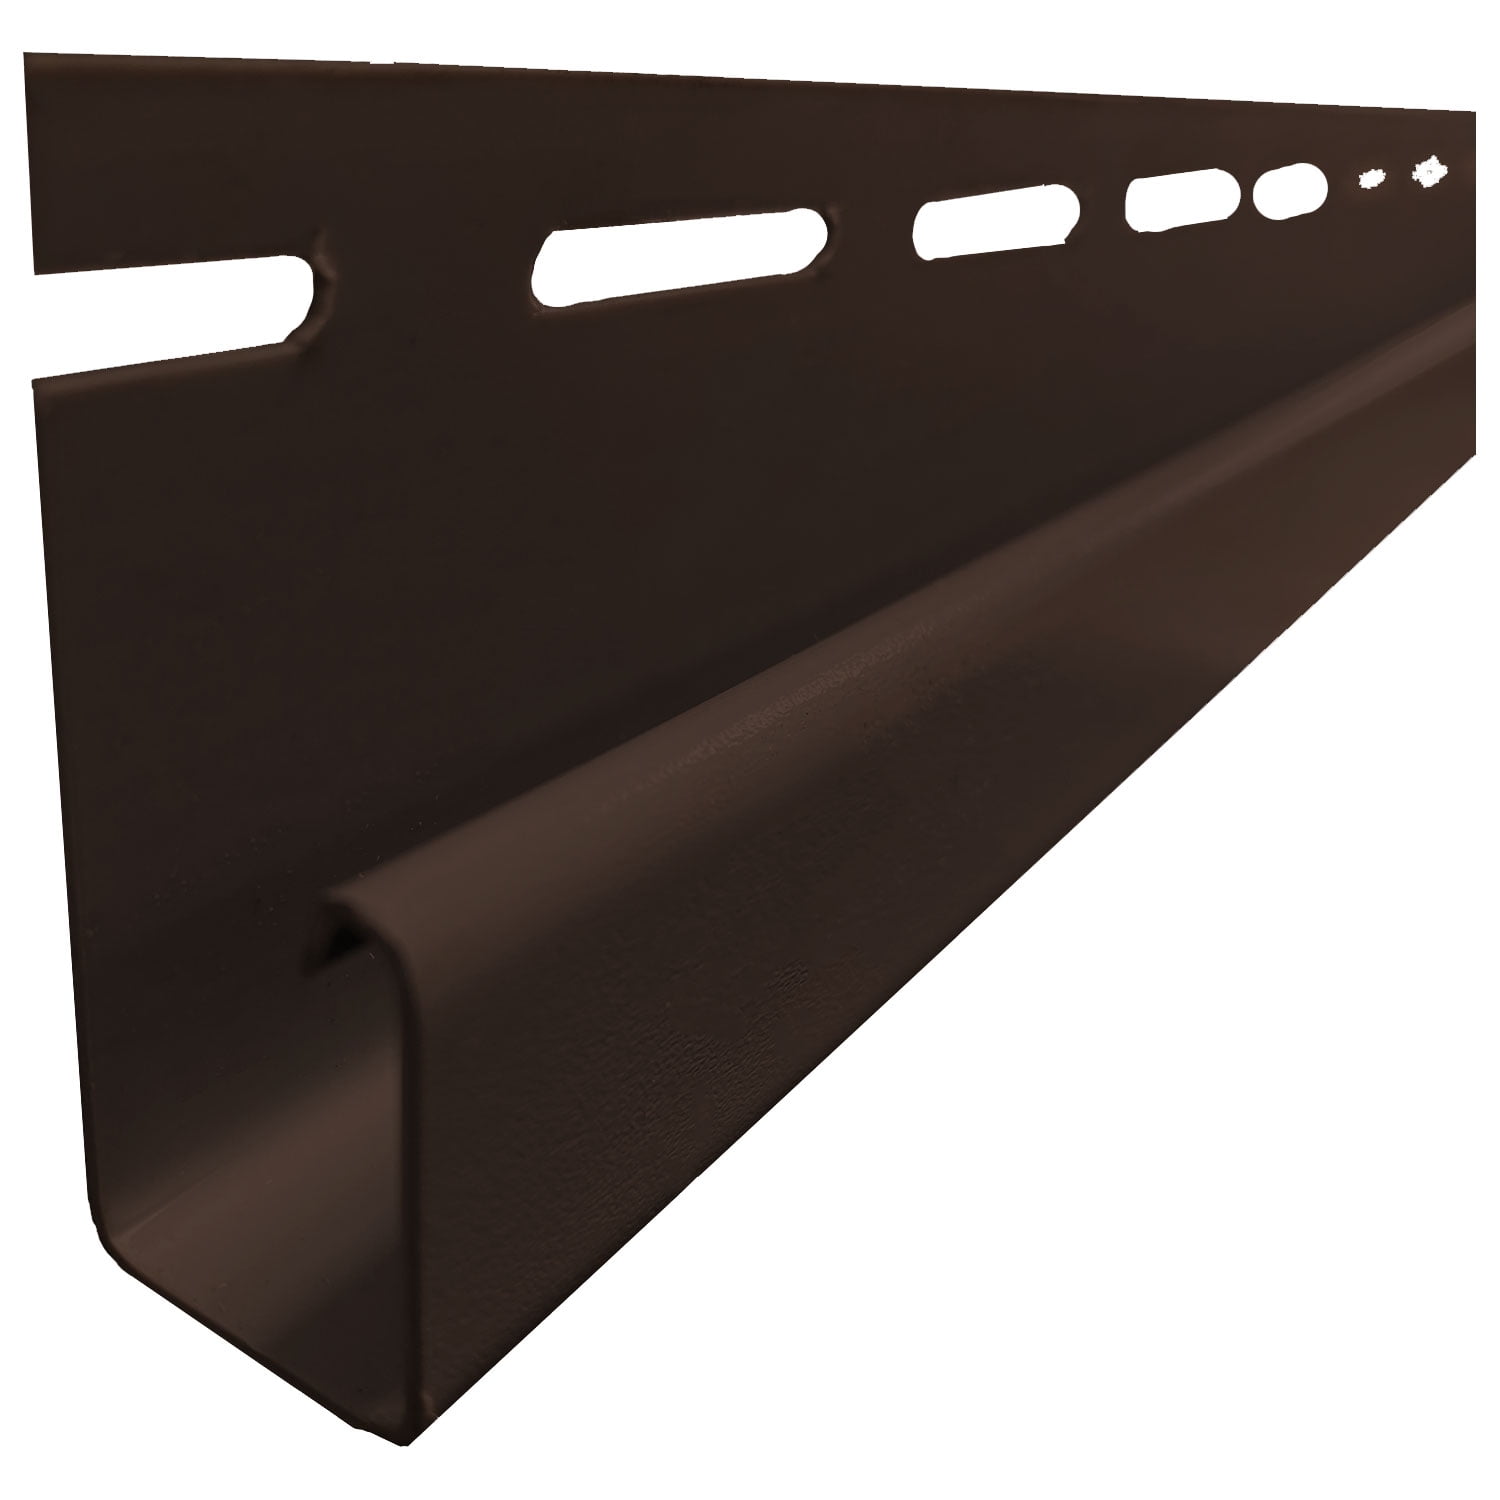 Polaris 1/2 Inch Vinyl J Channel 6 ft 3 (Soffit Use Only) (Carton of 20)